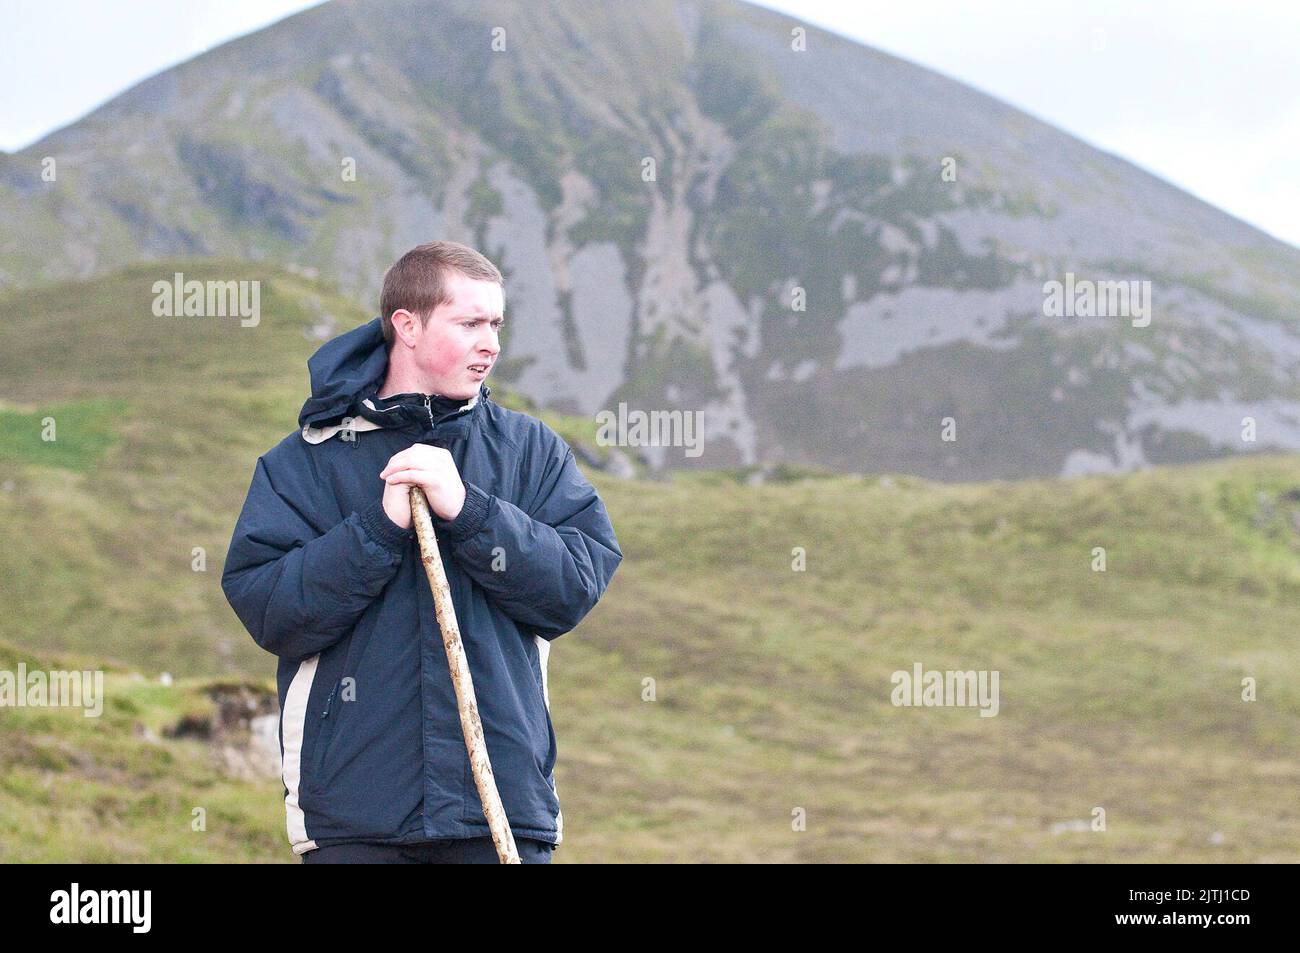 'Reek Sunday', a guelling pilgrimage up Croagh Patrick, County Mayo on the last Sunday in July each year, to visit the location where Saint Patrick stayed for 40 days, and from where his was said to have banished the lizards and snakes from Ireland. Stock Photo